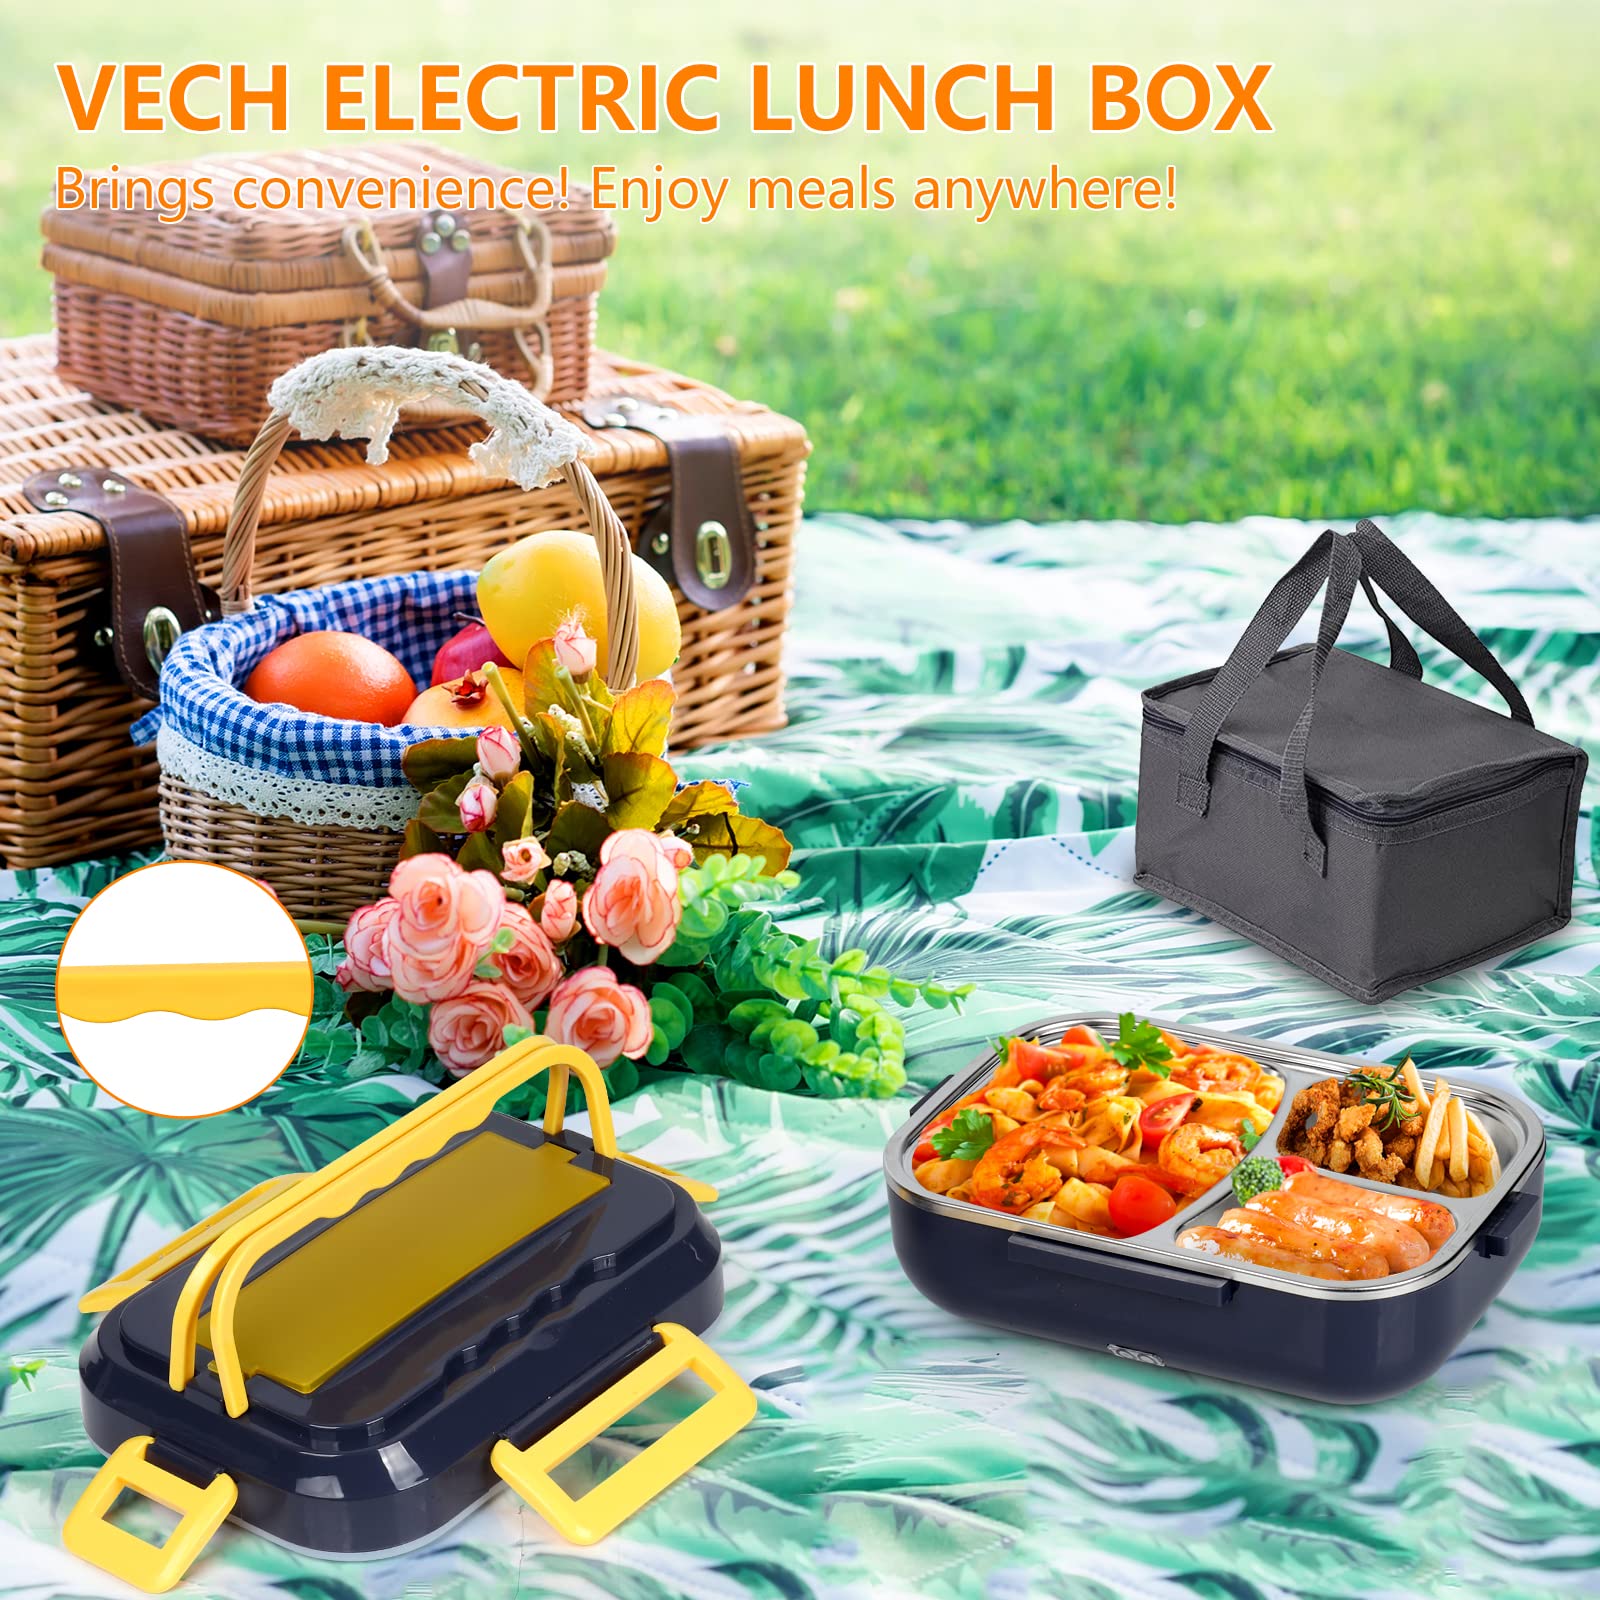 VECH Electric Food Heater Lunch Box Leakproof Portable Heated Lunch Box 110V/12V/24V for Office and Car/Truck, Food Warmer with Removable Stainless Steel Container and Carry Bag (Purple)